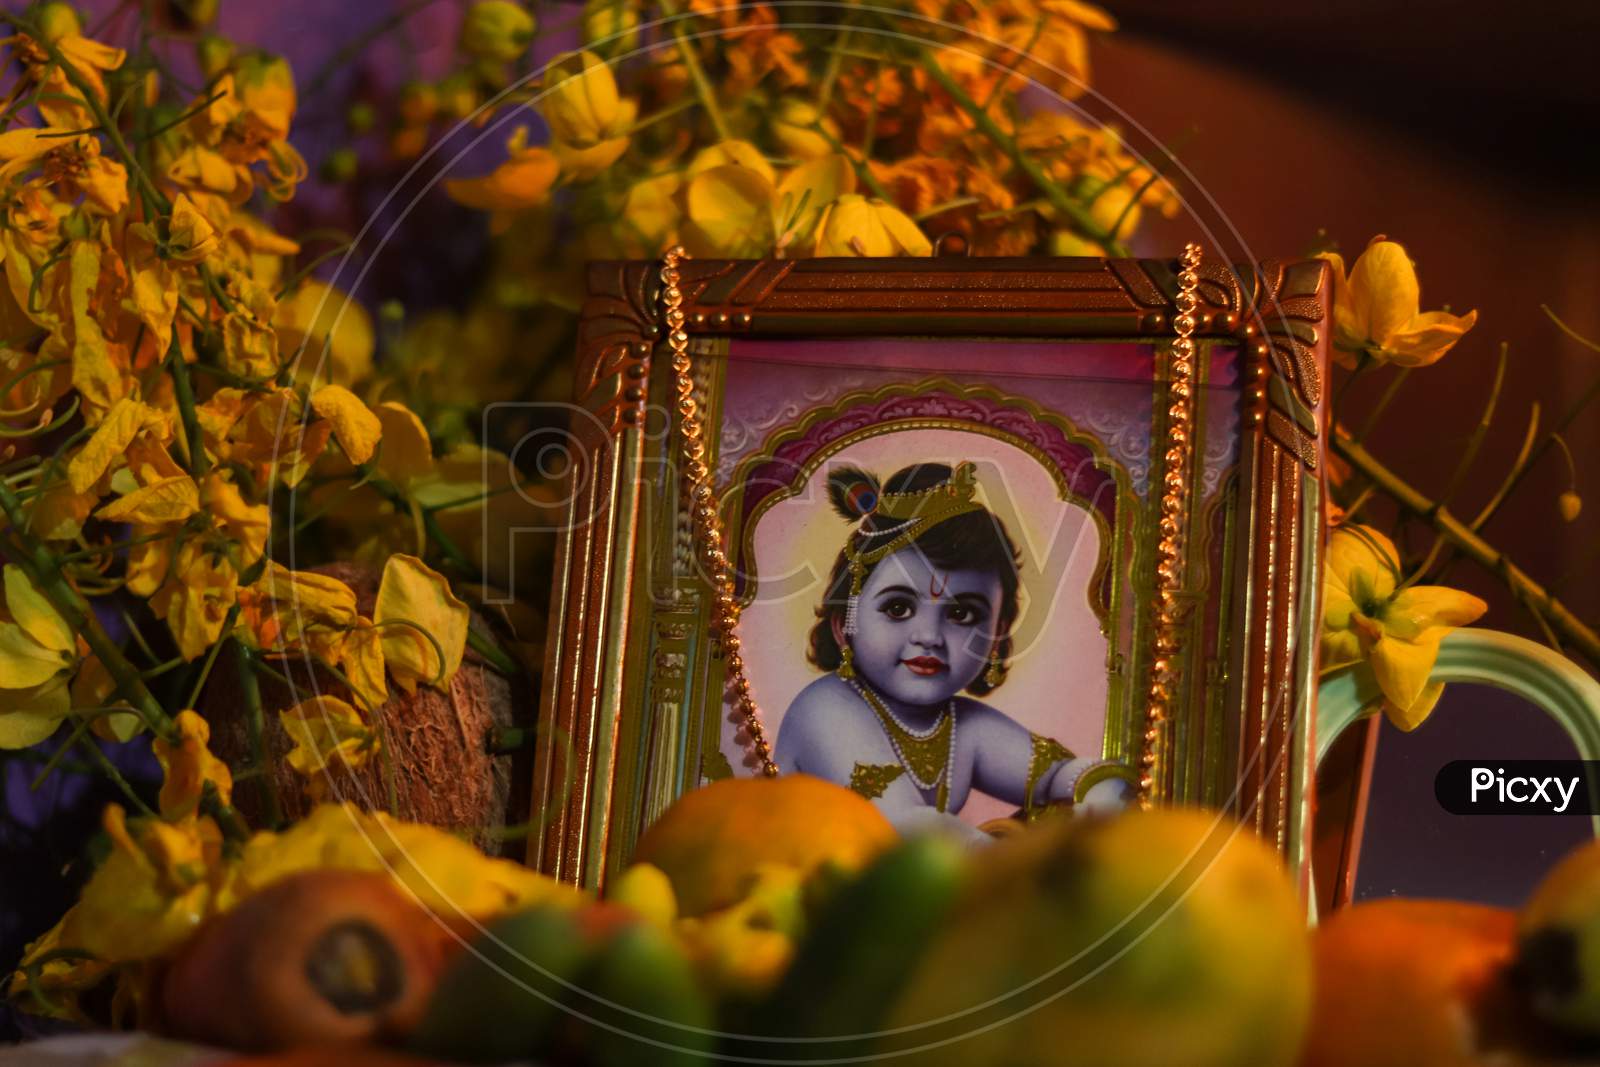 Vishukkani Arranged In Kerala. Vishu Is An Indian Festival Natively Celebrated In One Of The Indian State Kerala.